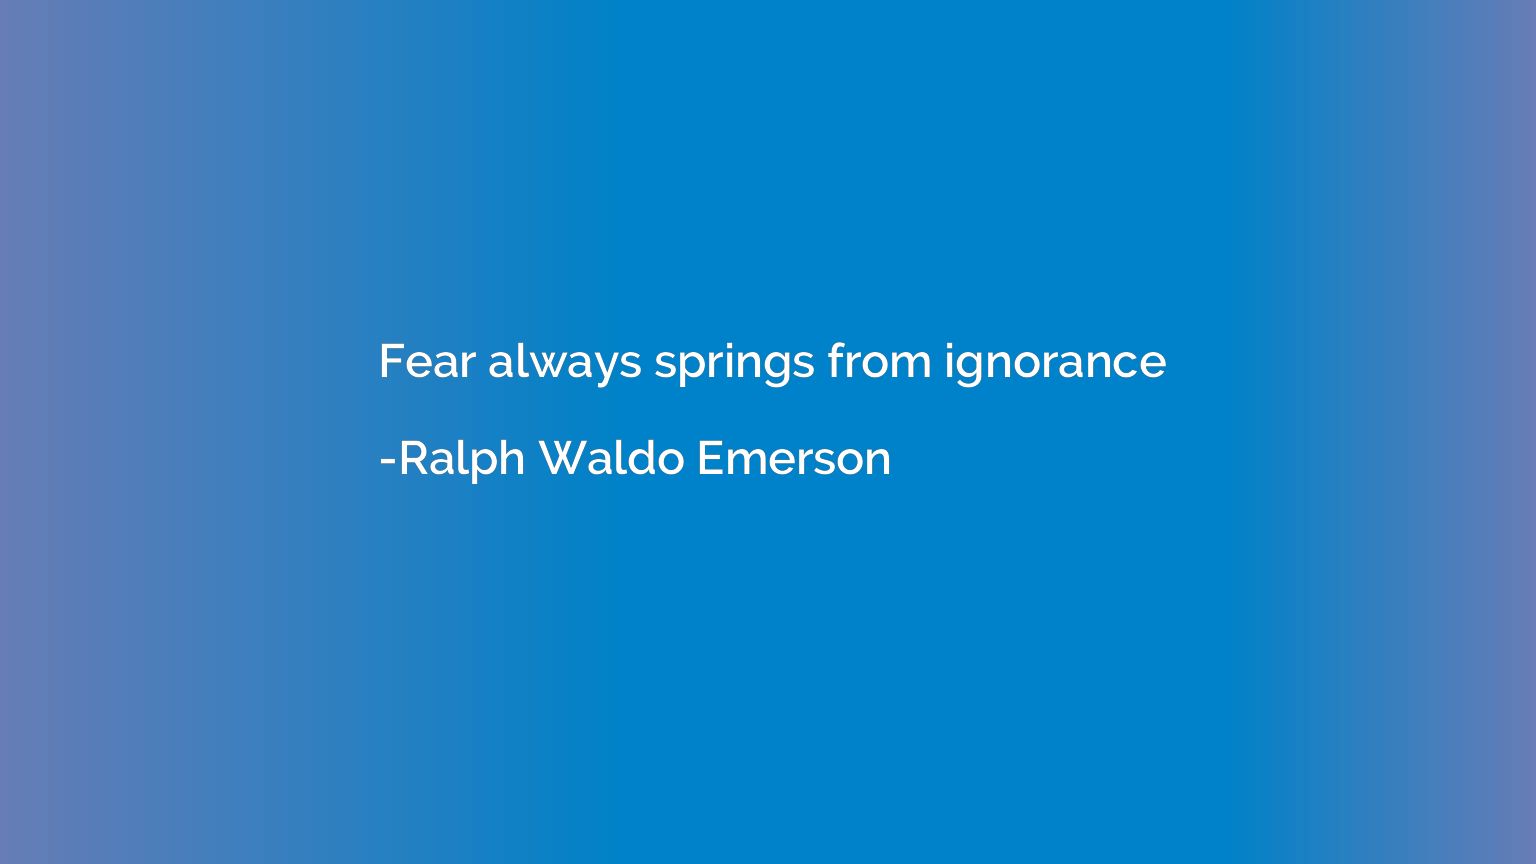 Fear always springs from ignorance